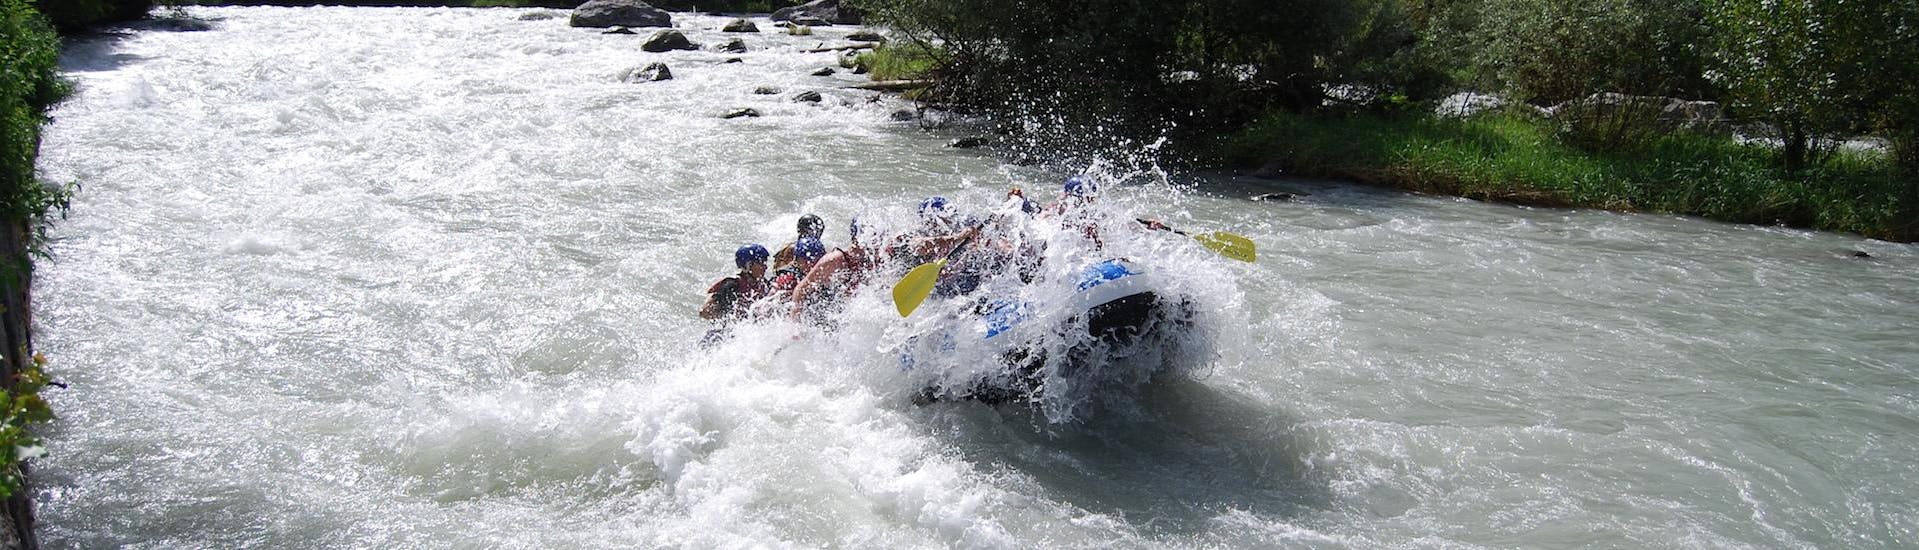 Anspruchsvolle Rafting-Tour in Castione Andevenno - Adda.